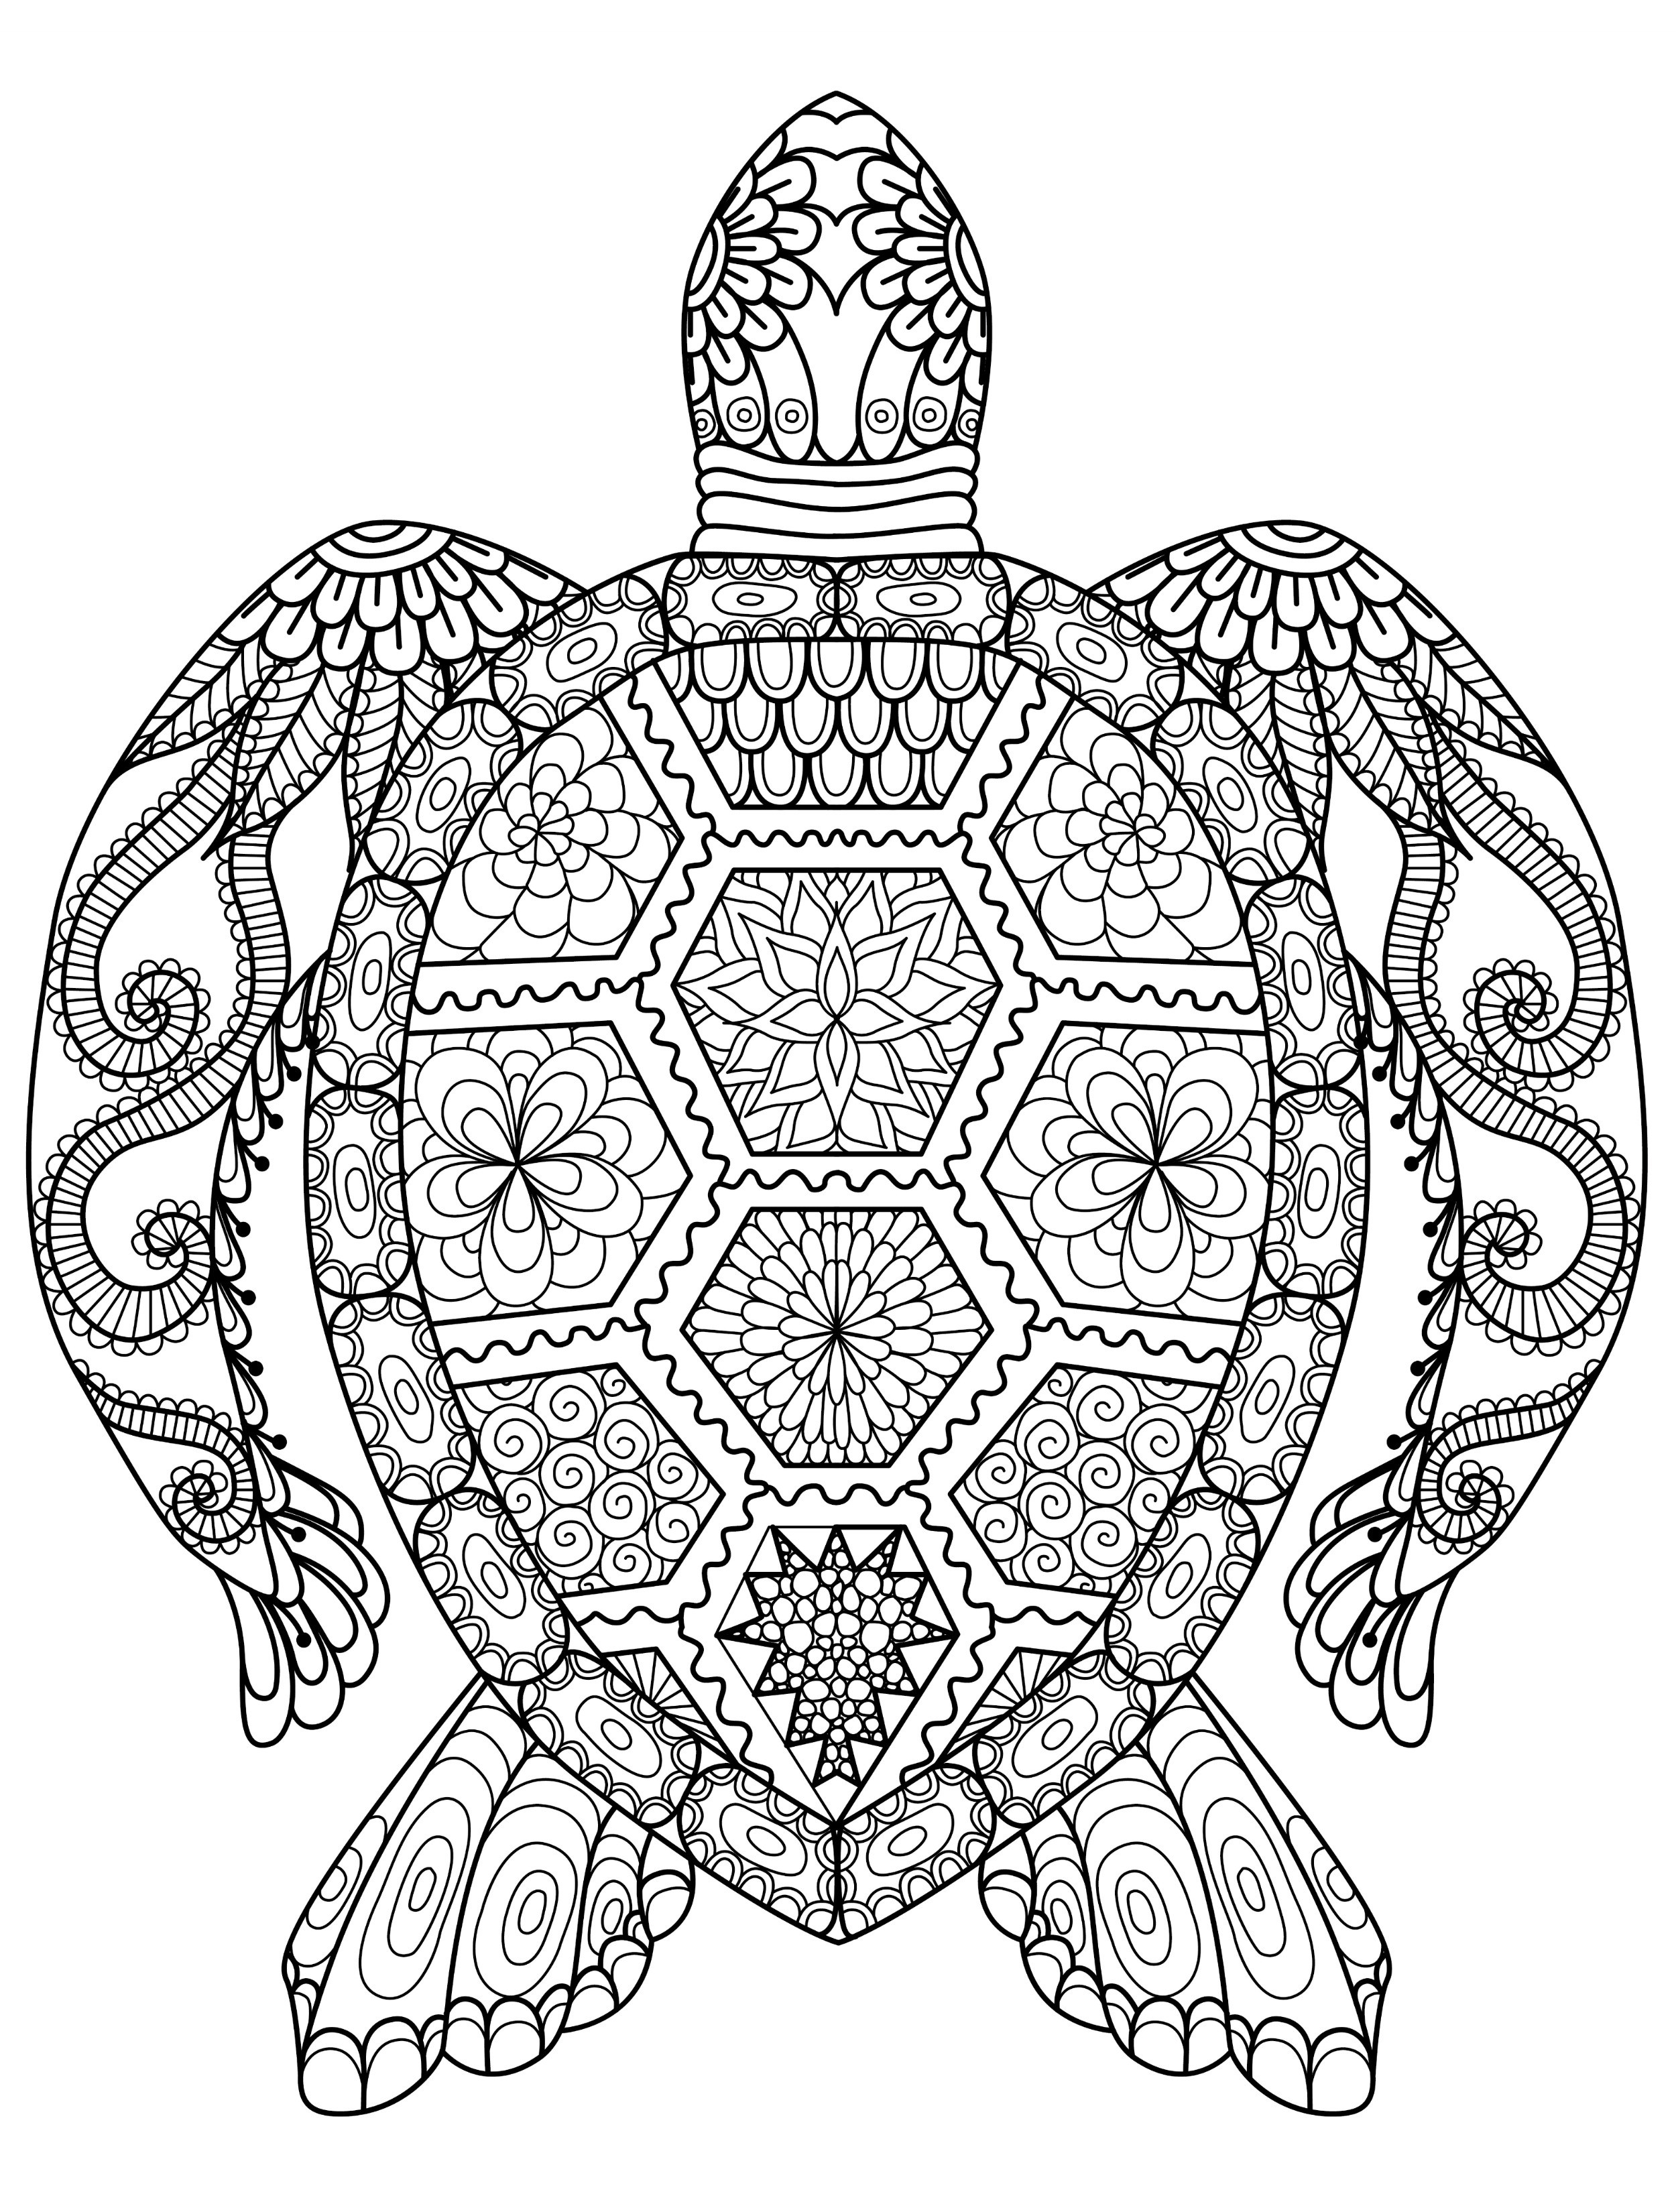 Animal Coloring Pages For Adults at GetColorings.com   Free ...